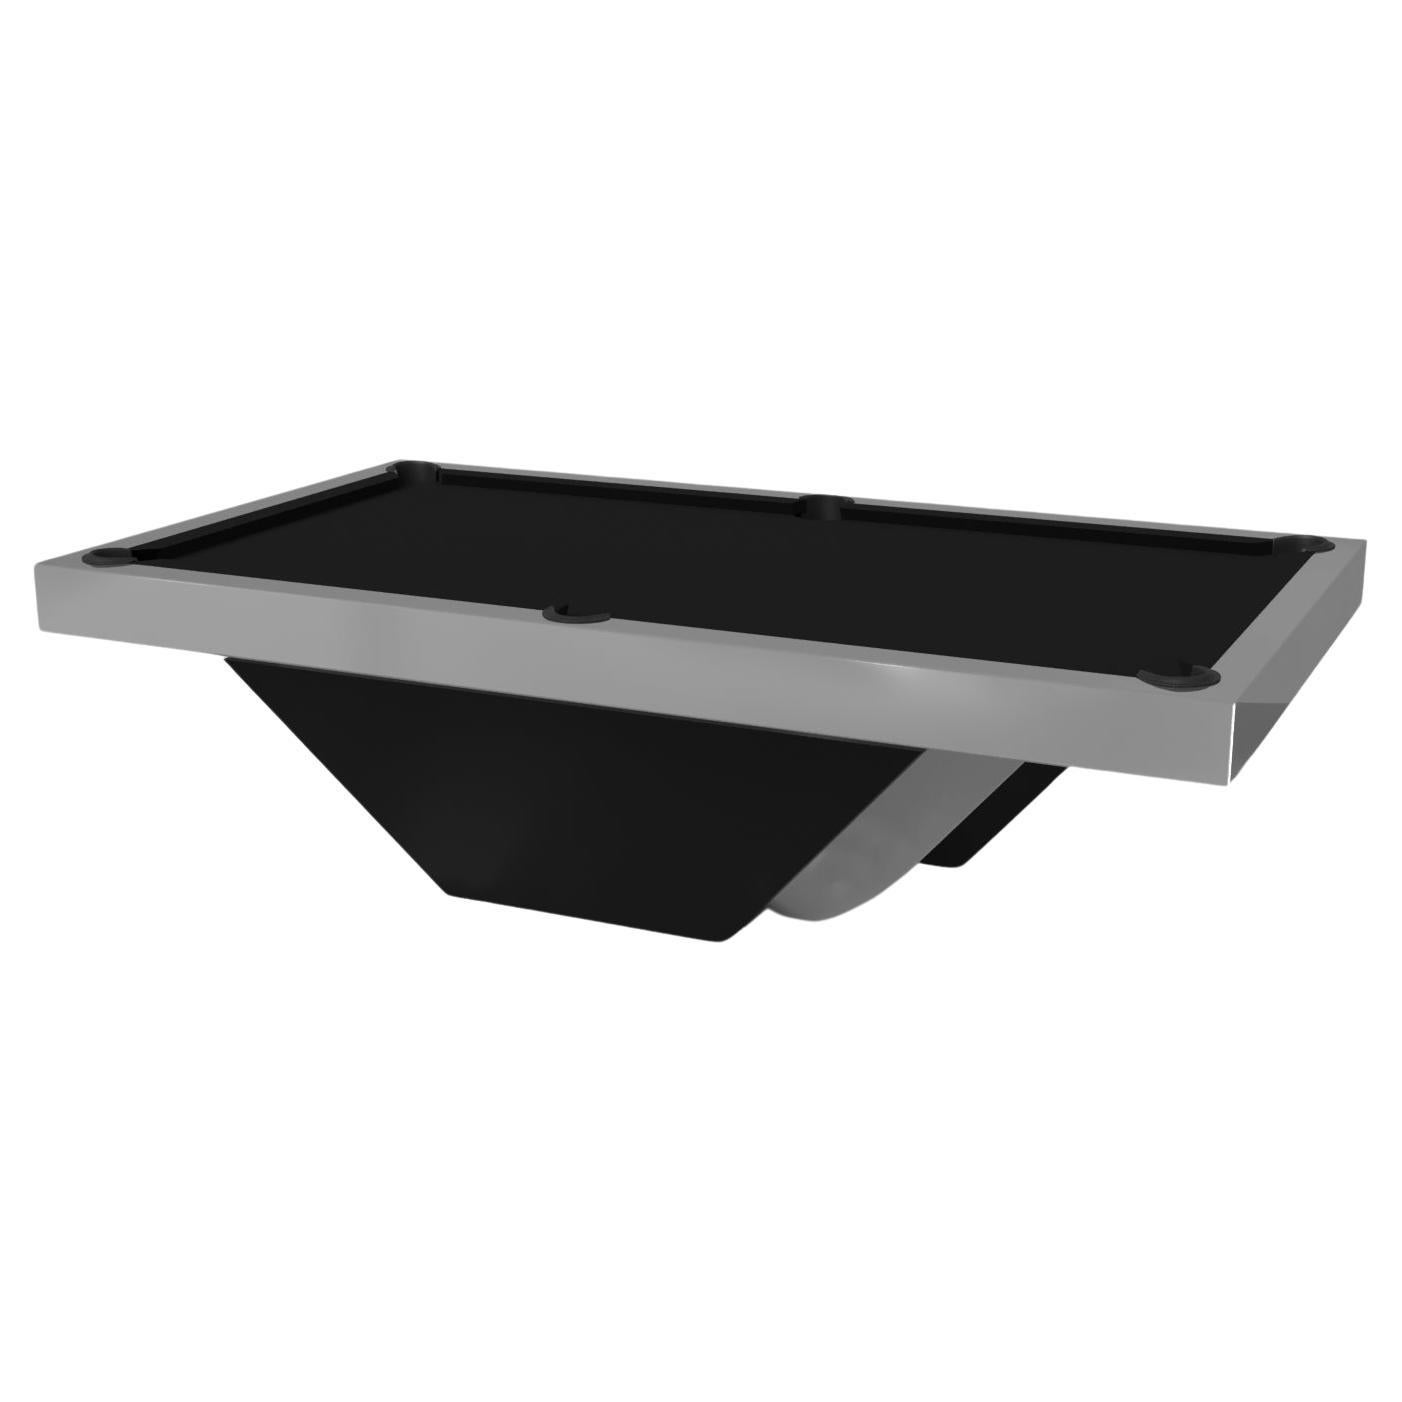 Elevate Customs Vogue Pool Table / Solid Stainless Steel in 8.5' - Made in USA For Sale